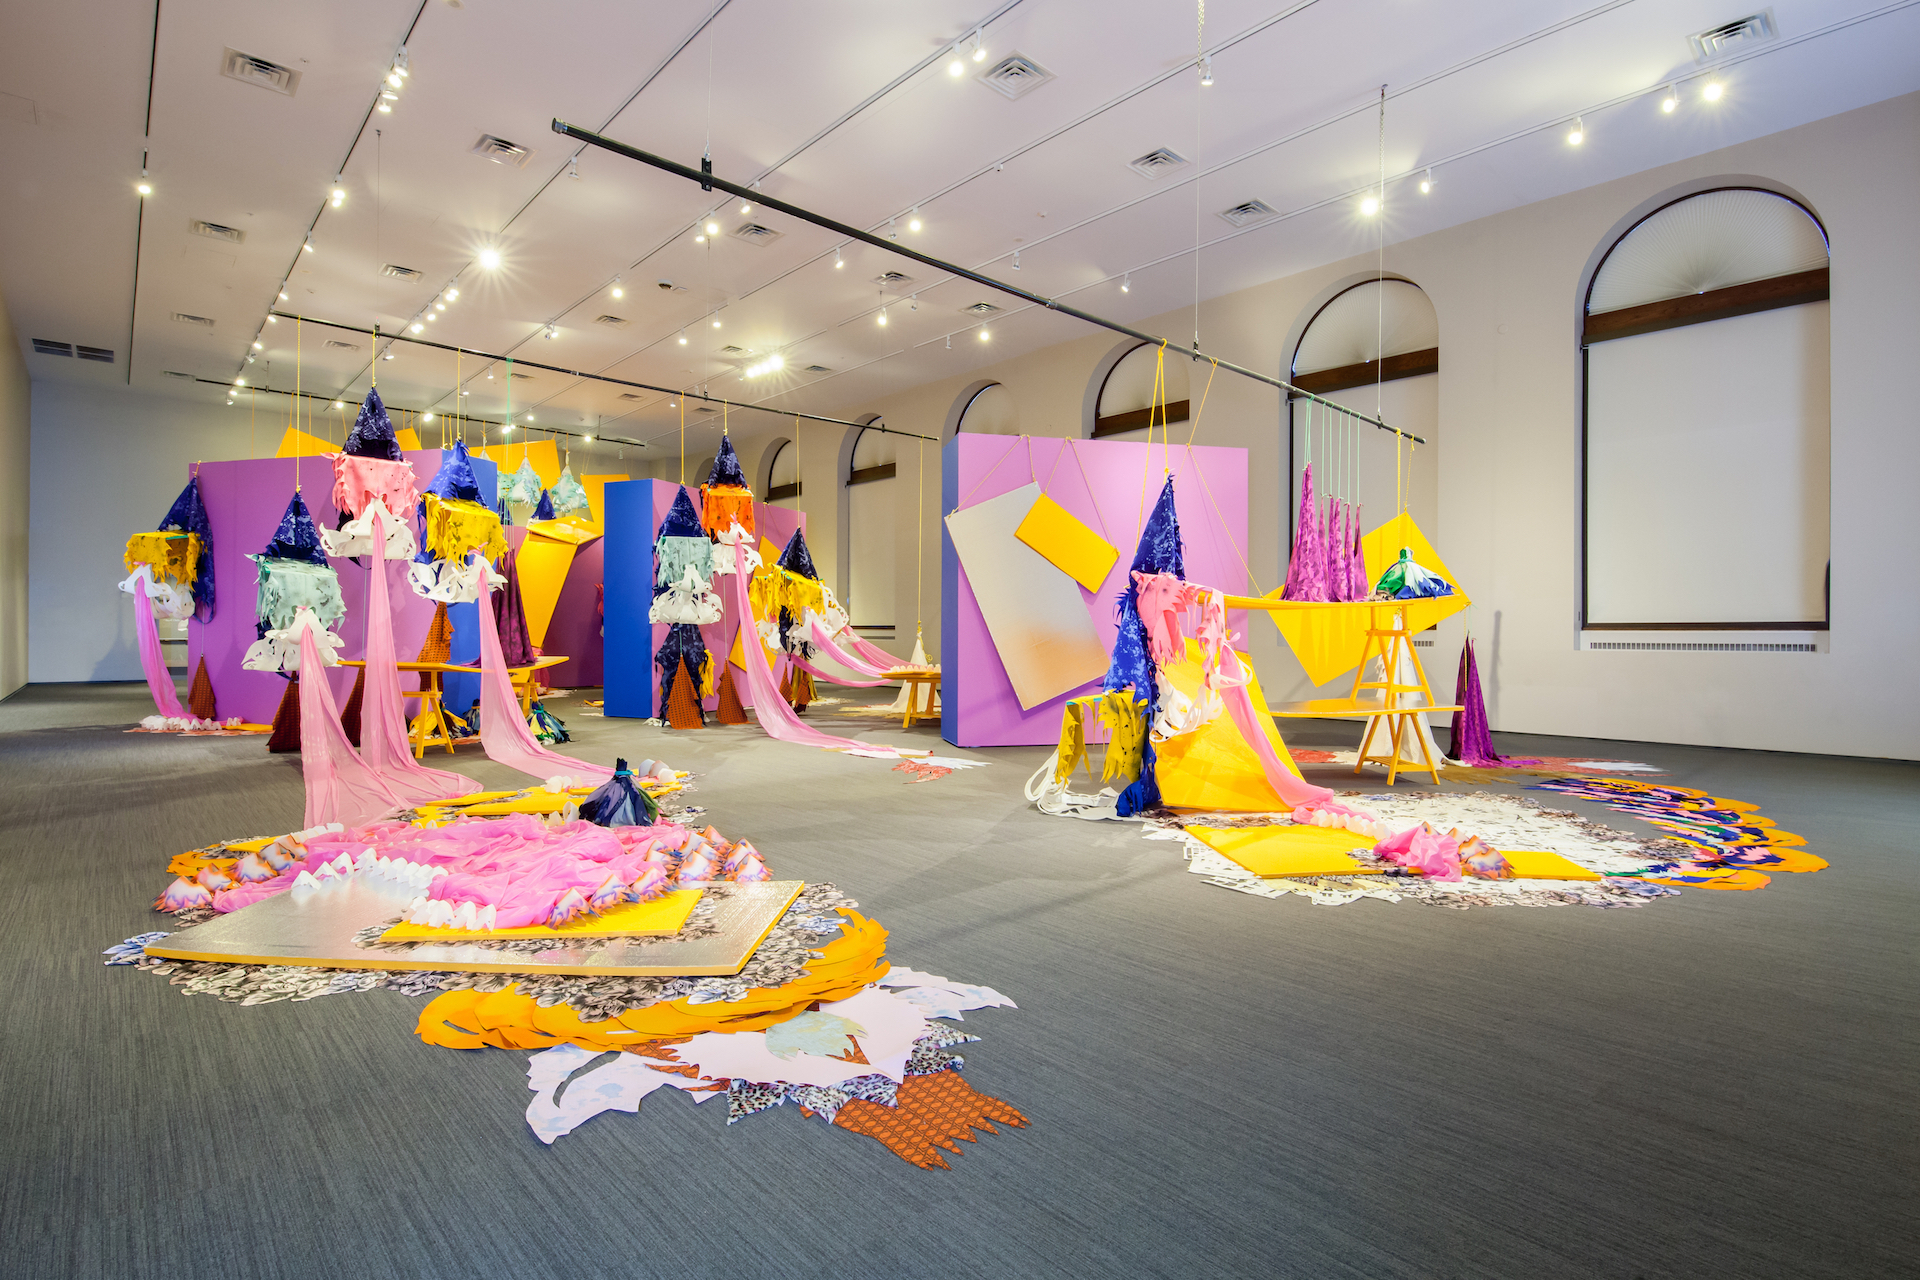 Duplicitous Diffusion, assorted fabrics, foam, paint, and other mixed media, dimensions variable, 2018. Installation view: Washington Pavilion, Sioux Falls, SD. Photo credit: Jacinda Davis